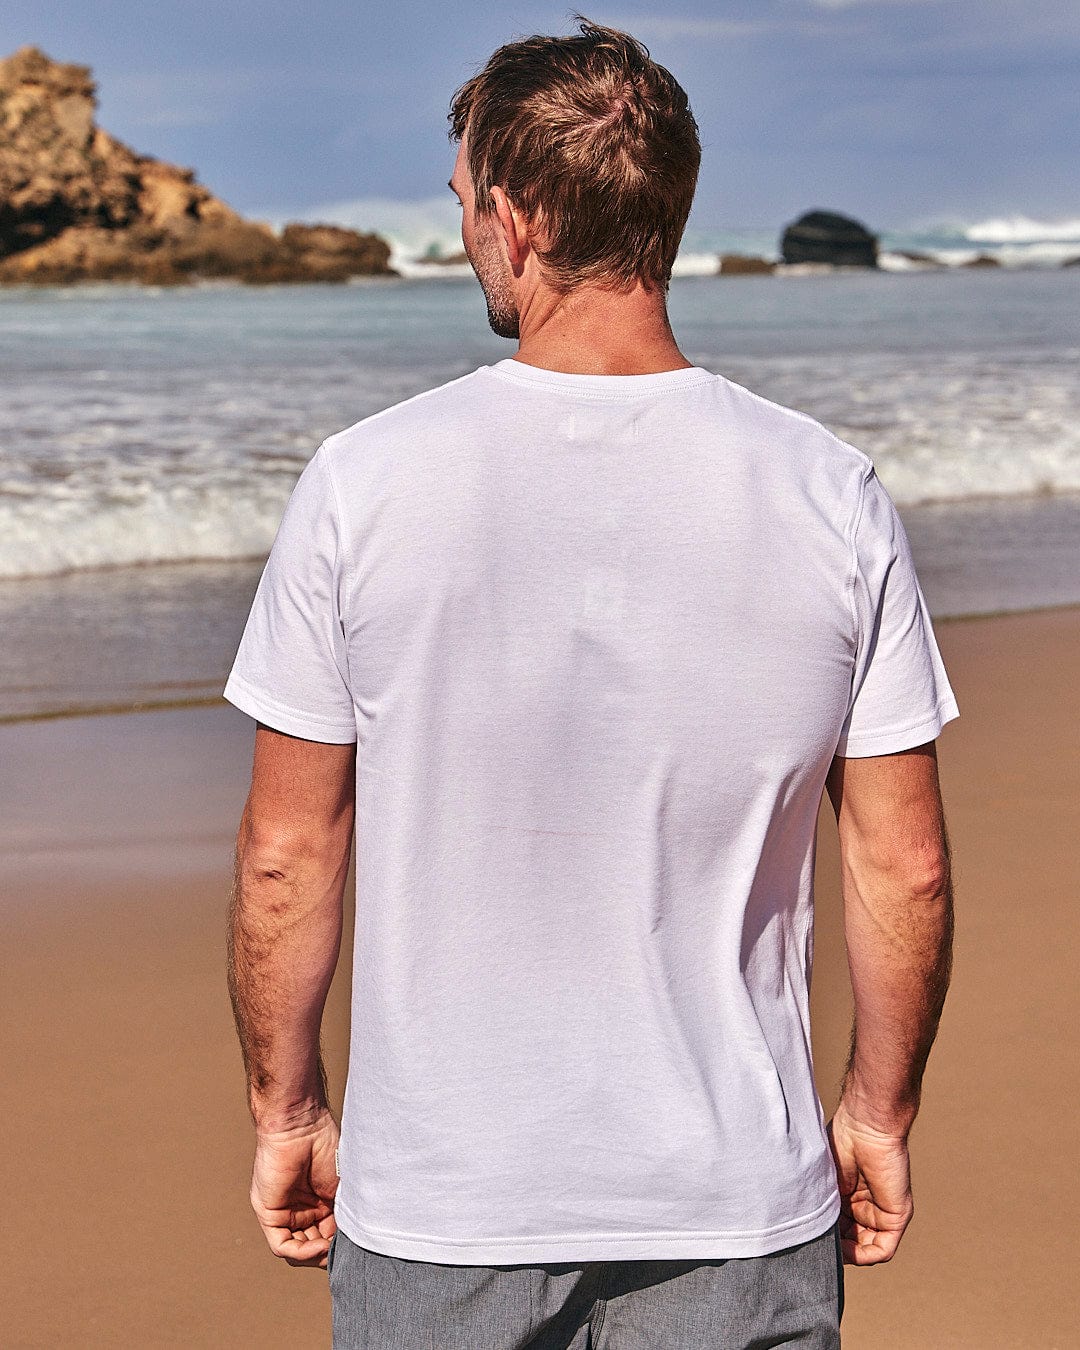 A man standing on the beach wearing a Saltrock Lost At Sea Skull - Mens Short Sleeve T-Shirt - White.